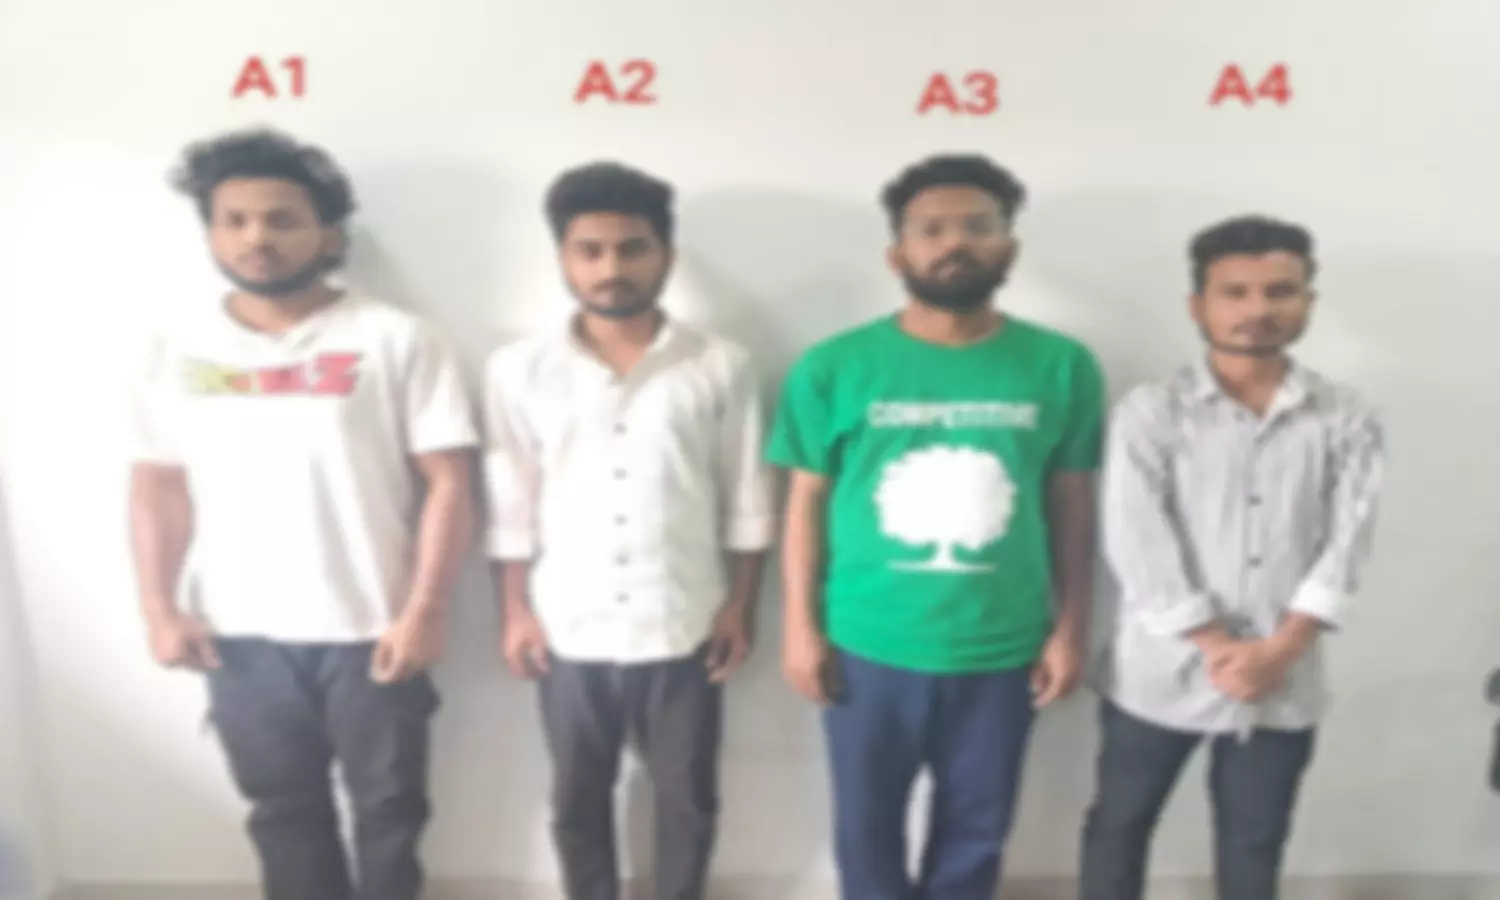 How captcha on WhatsApp for fake data entry scam looted money from people, Cyberabad police arrest four